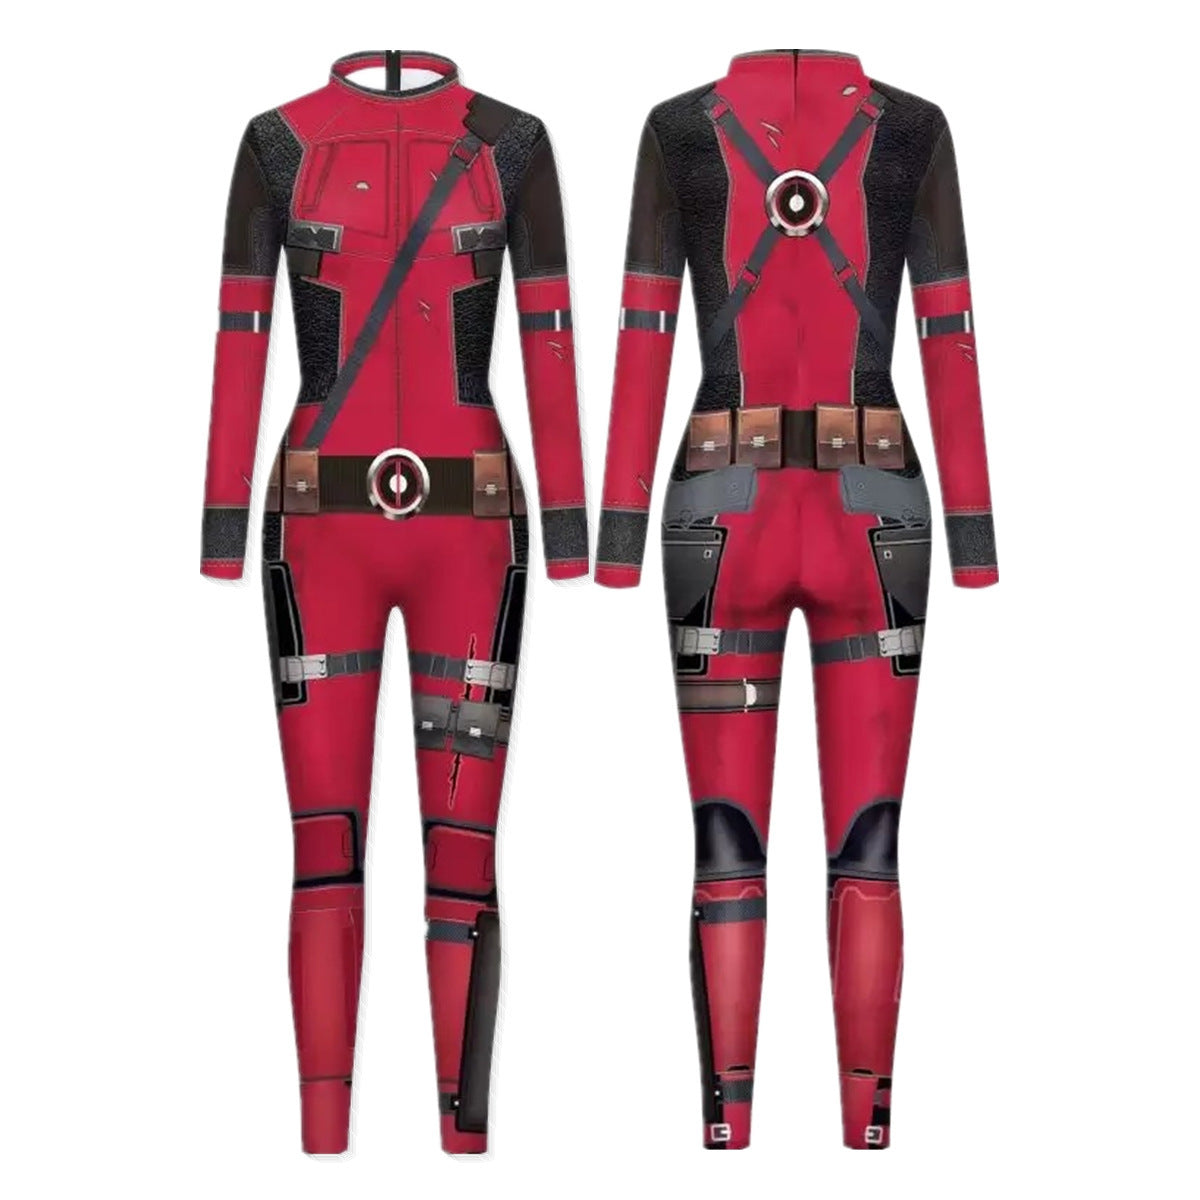 Adults Deady Pool Cosplay Costume Wade Jumpsuit for Halloween Party